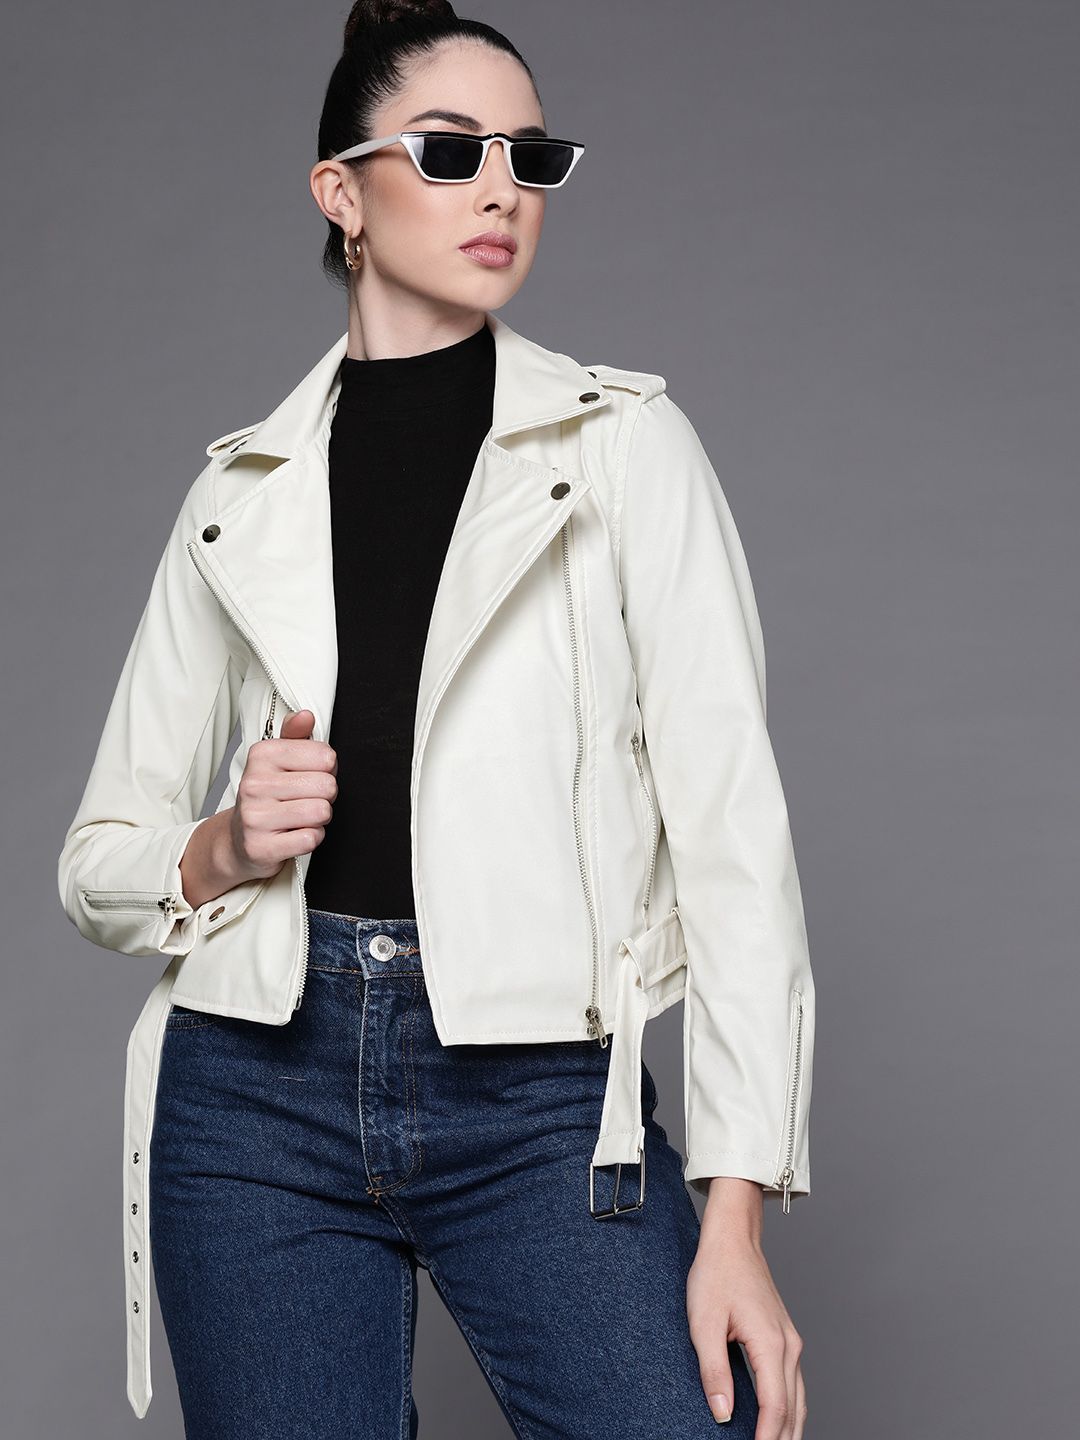 JC Mode Women White Solid Tailored Jacket Price in India